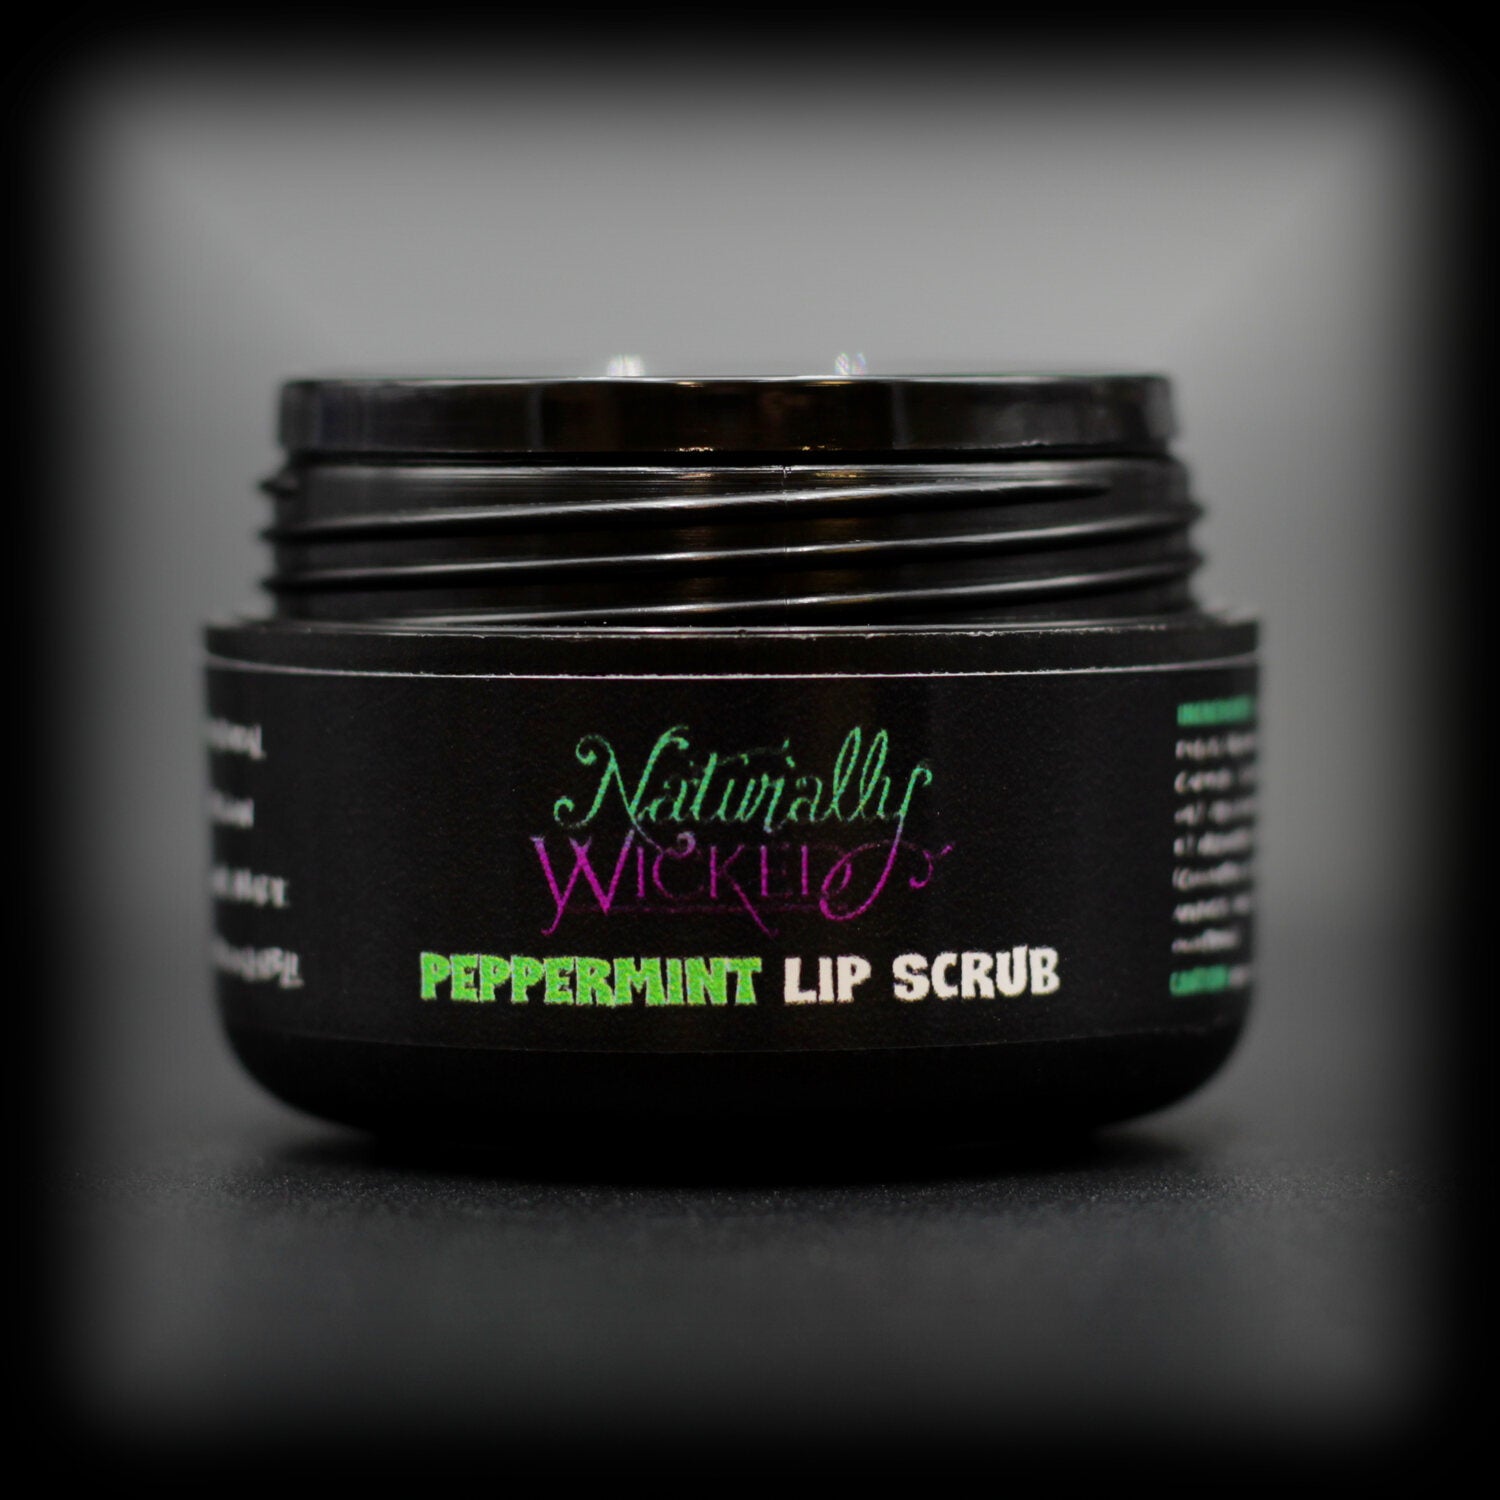 Naturally Wicked Peppermint Lip Scrub In Luxury Container With Lid Removed & Seal/Shive Visible